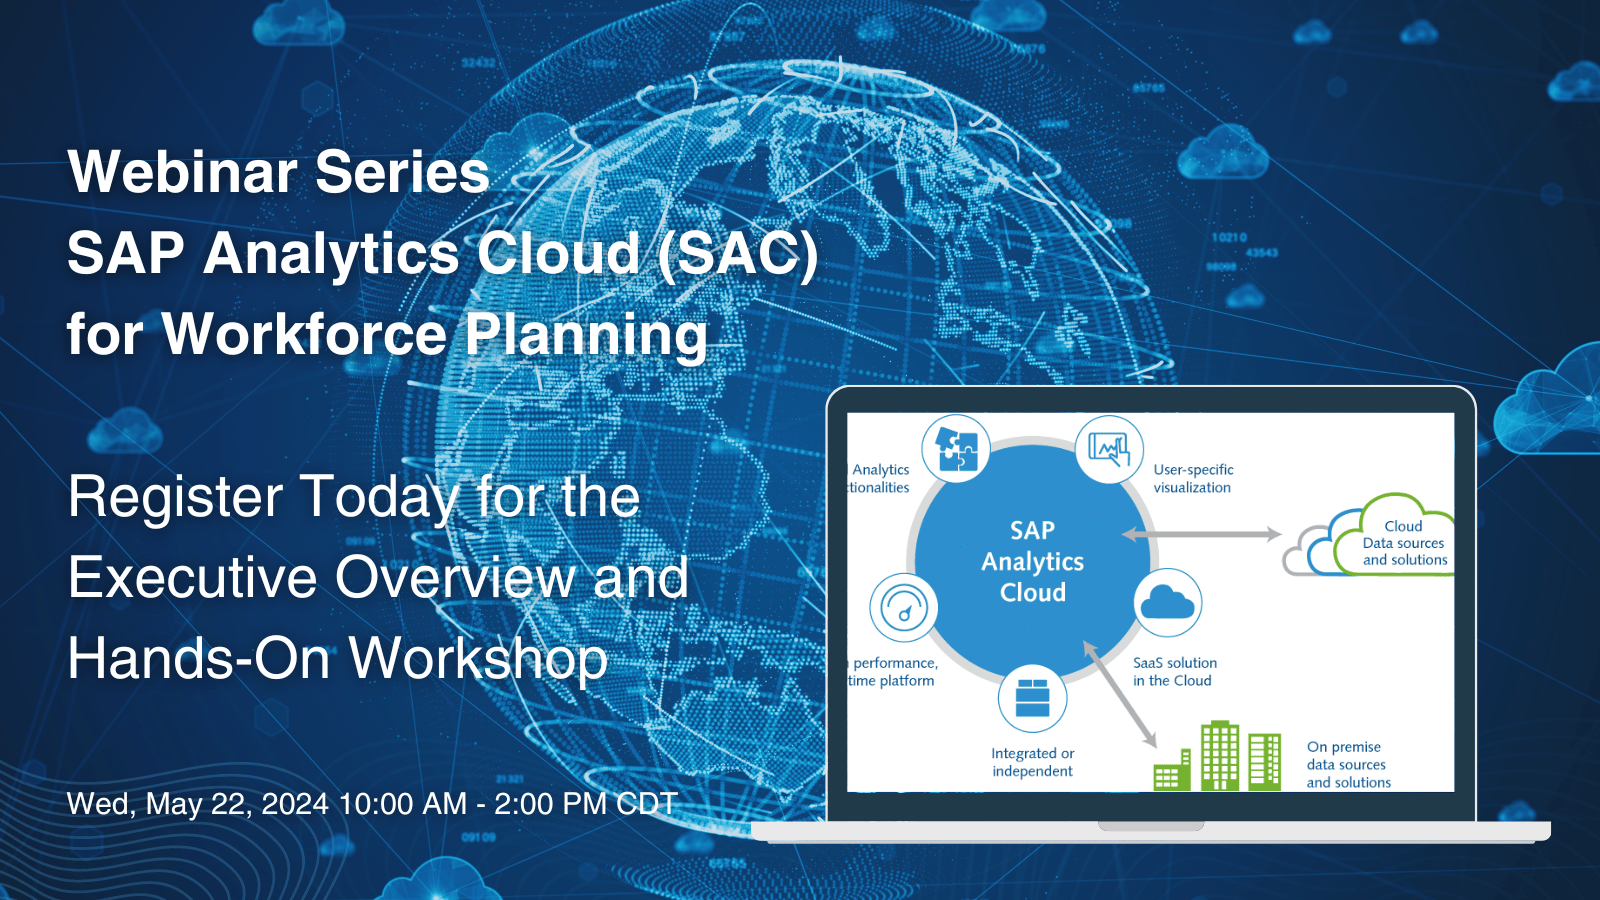 SAP Analytics Cloud (SAC) for Workforce Planning - Executive Overview and Hands-On Workshop